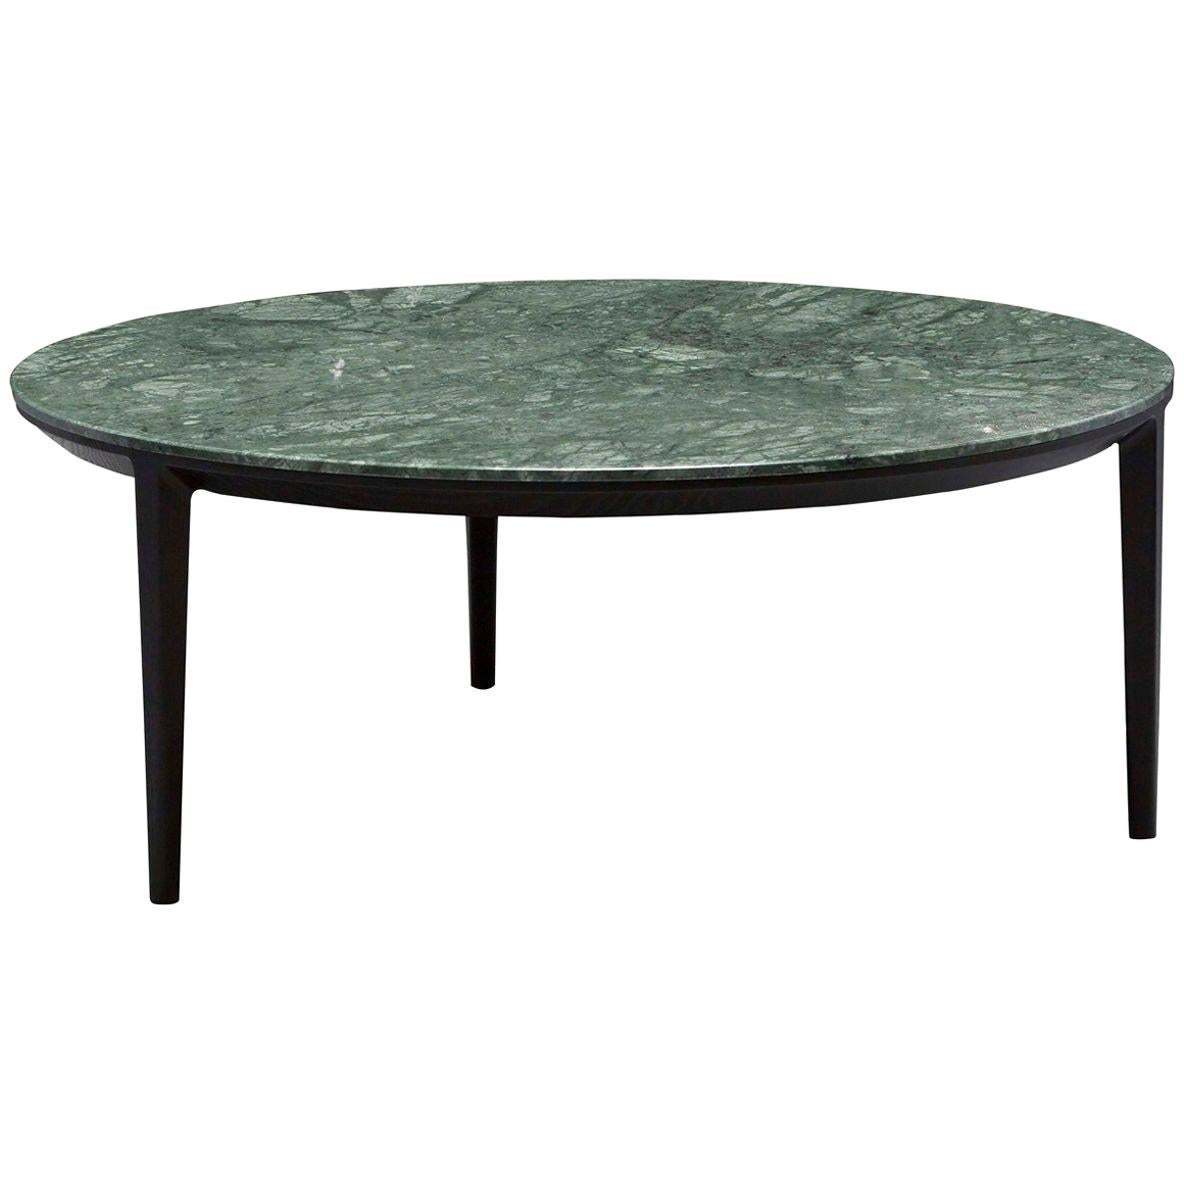 SP01 Etoile Coffee Table in Green Verde Guatemala Marble, Made in Italy For Sale